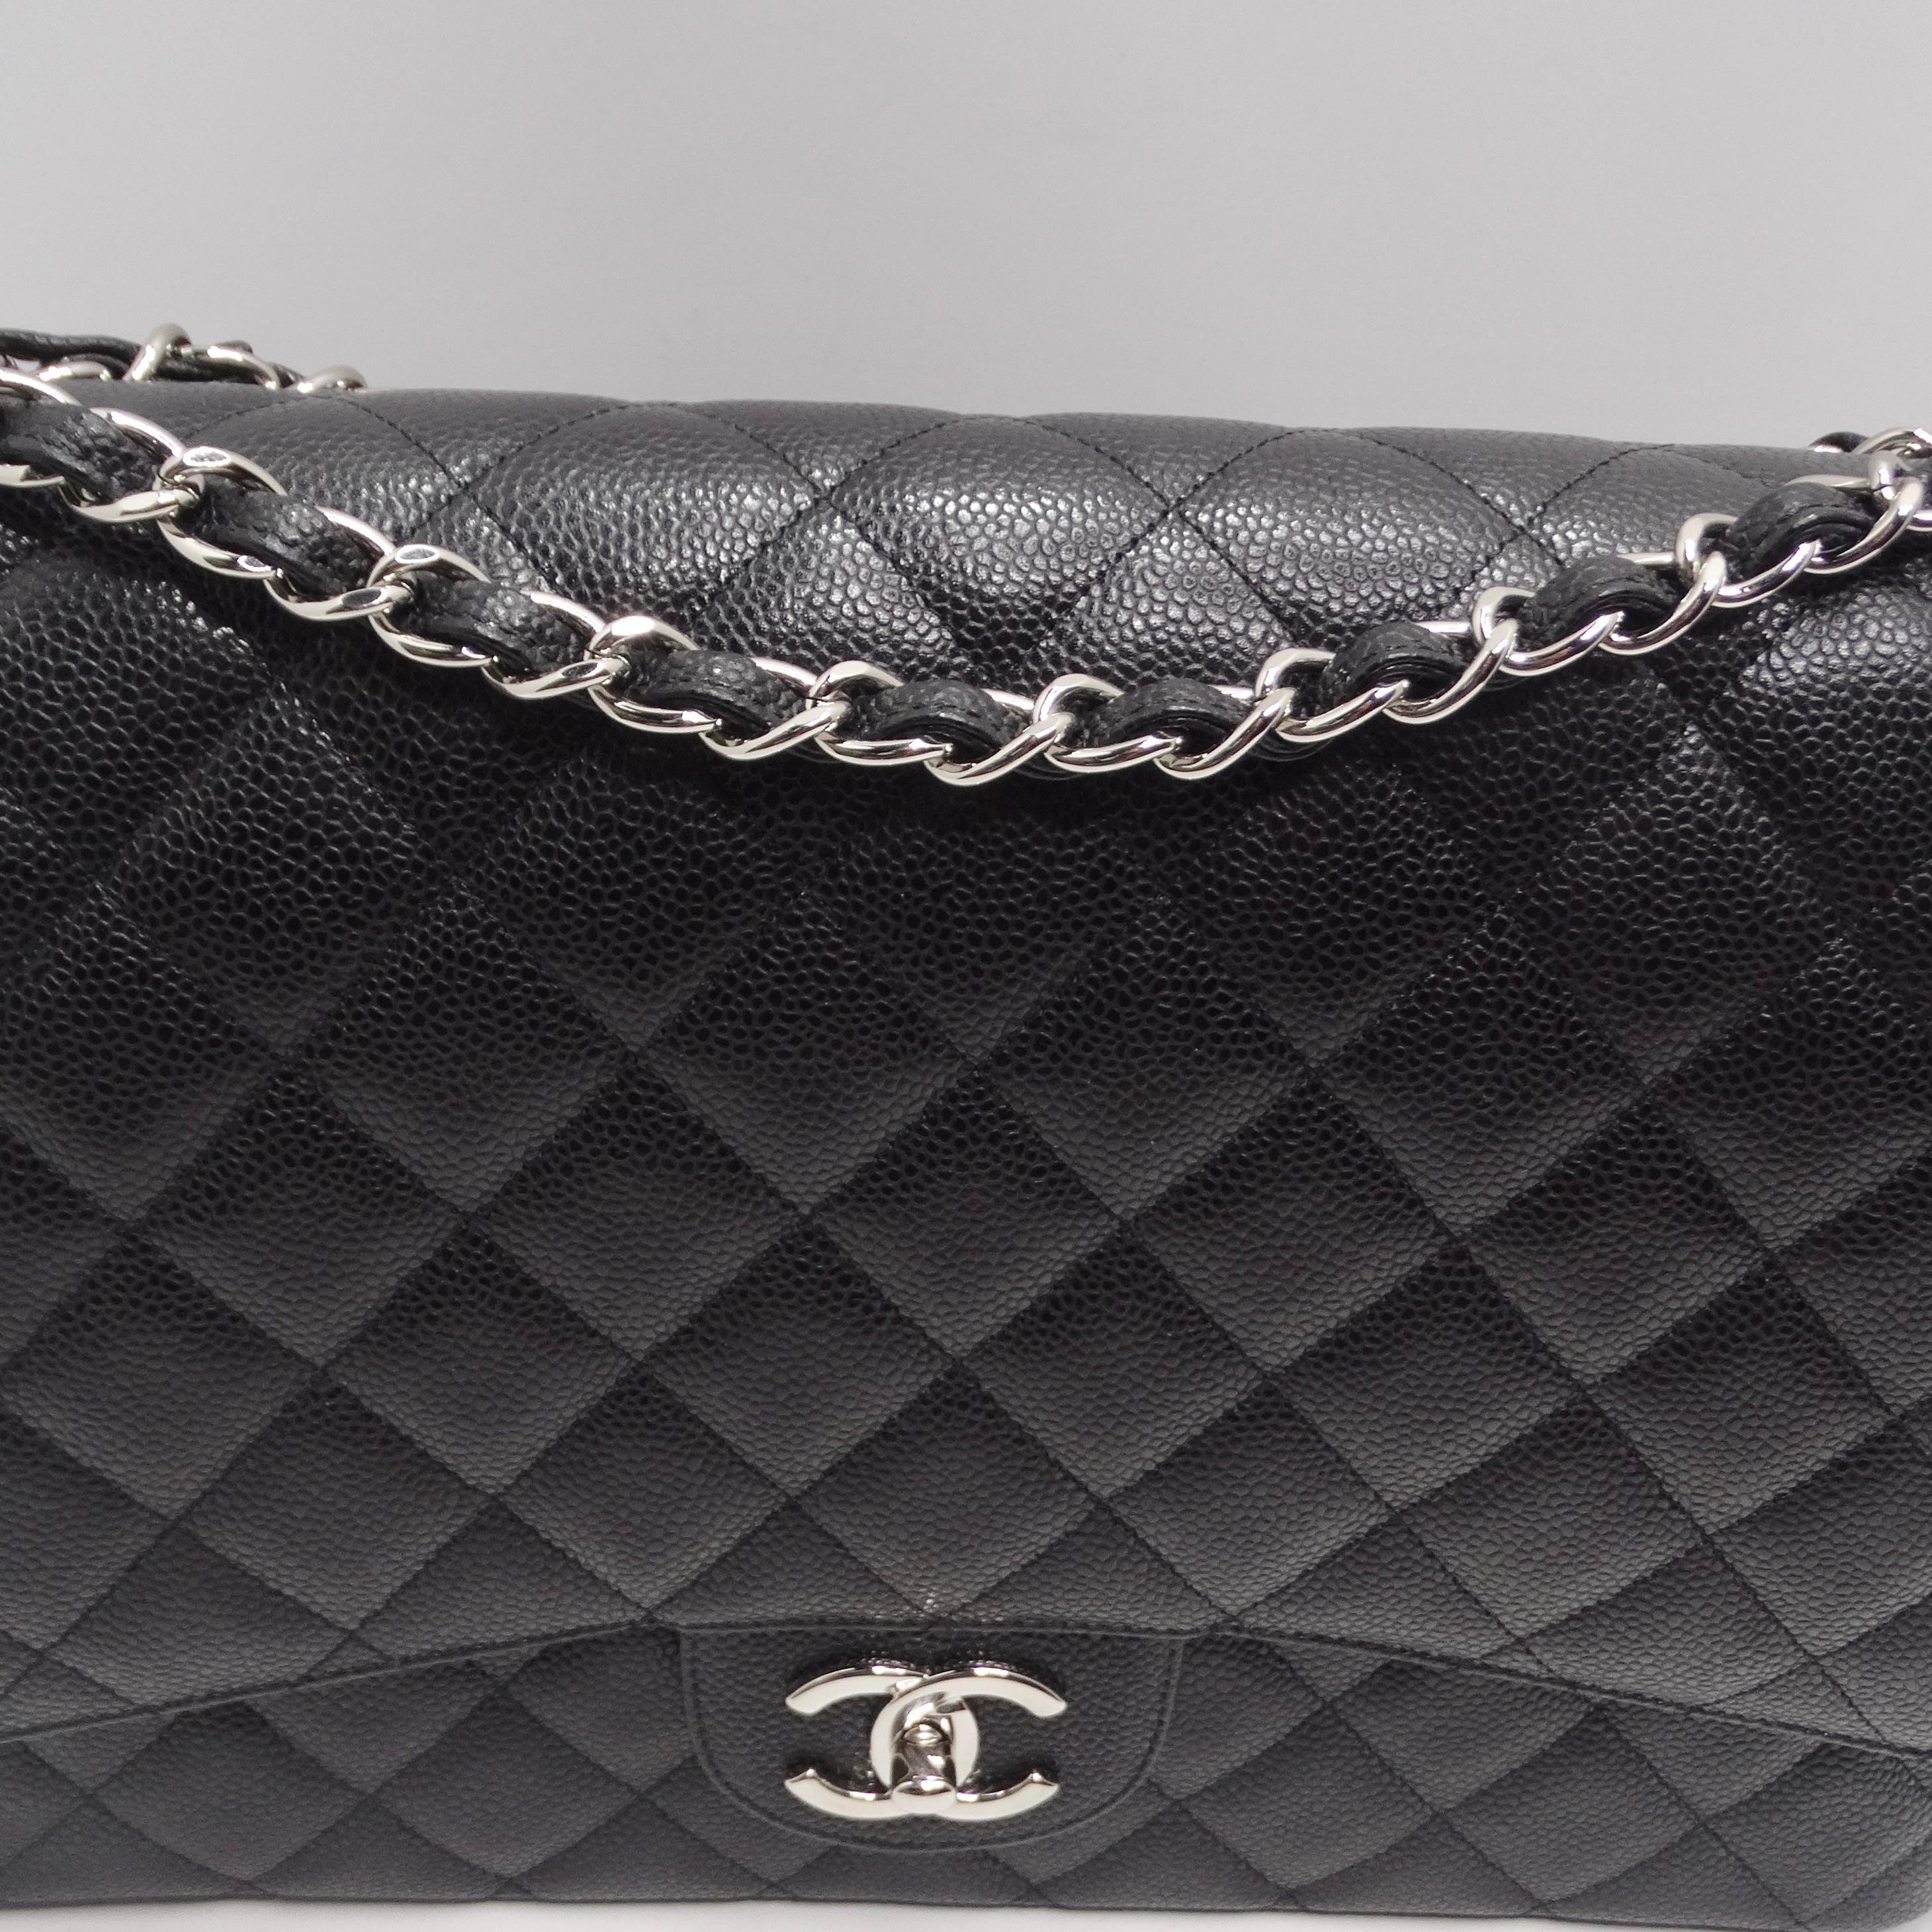 Chanel Caviar Quilted Jumbo Double Flap Black In Excellent Condition For Sale In Scottsdale, AZ